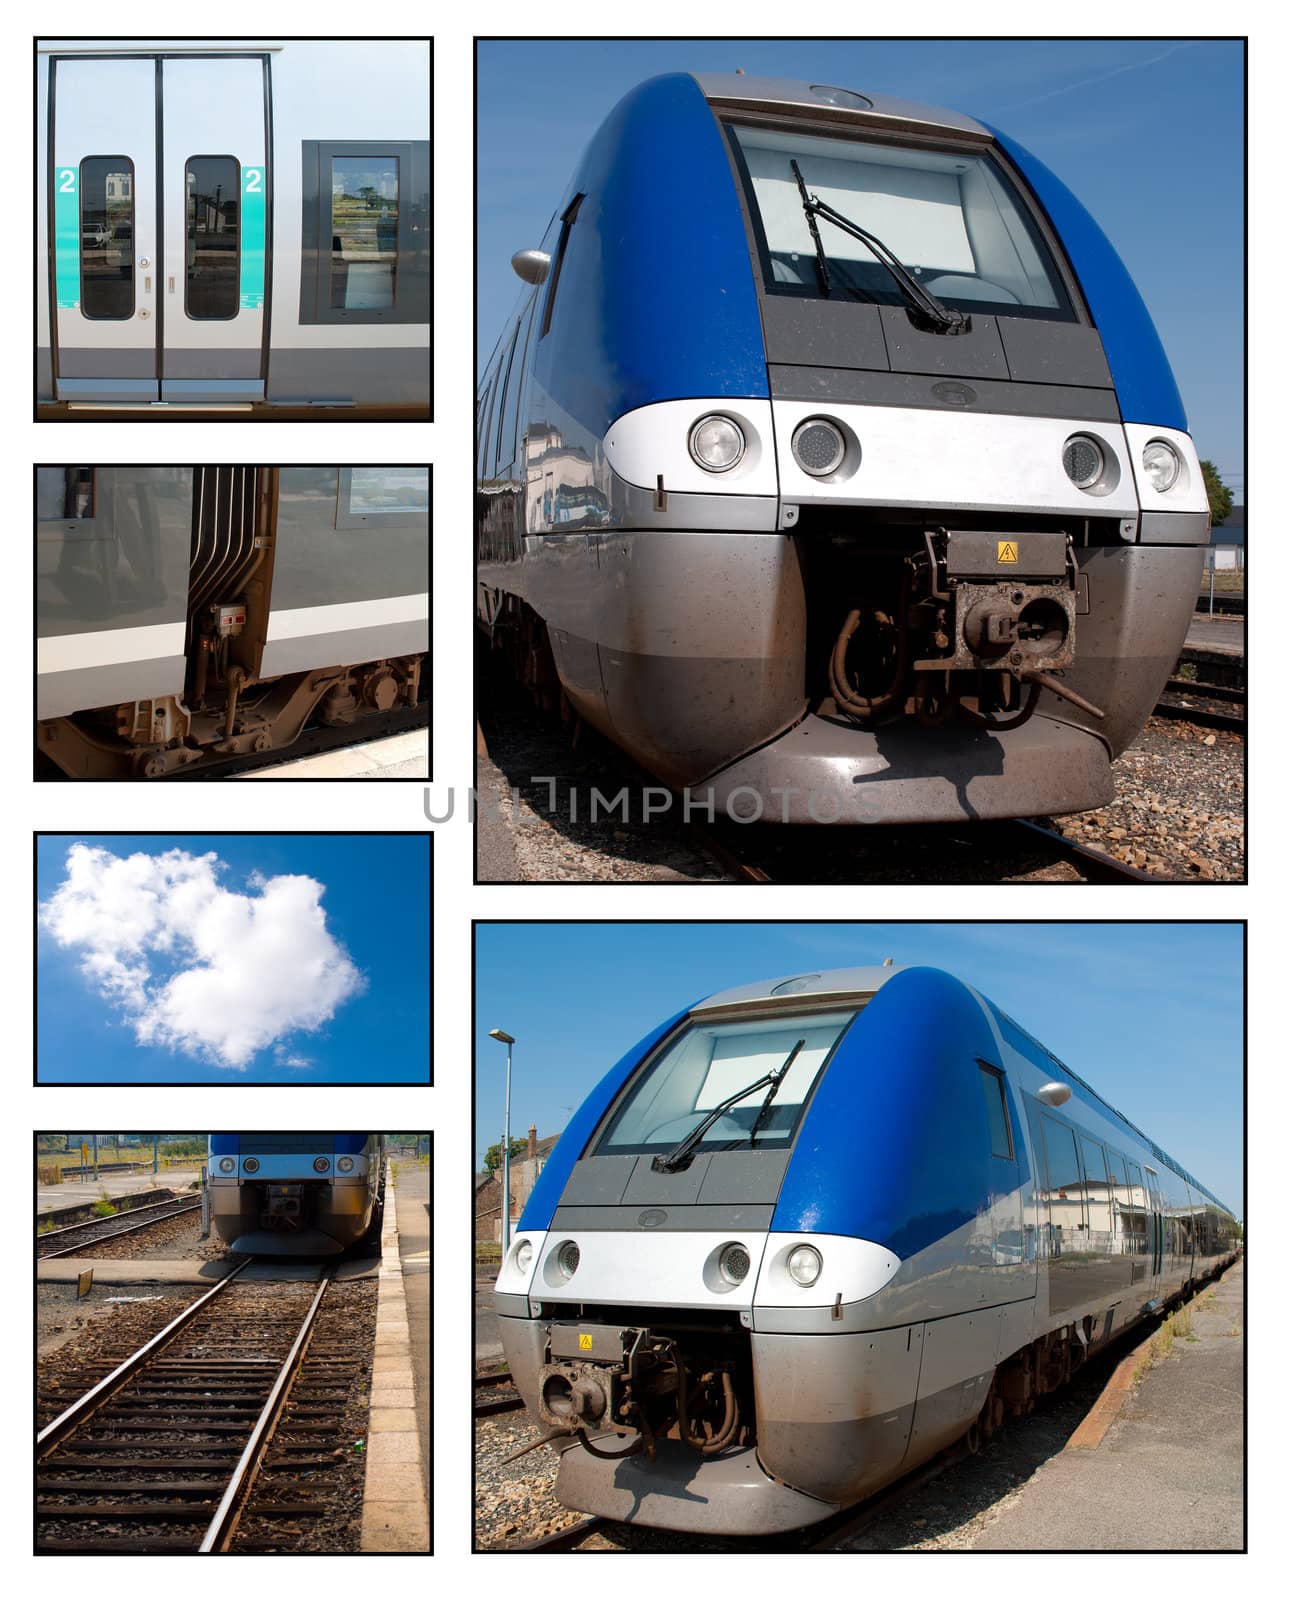 Blue train in a different view montage